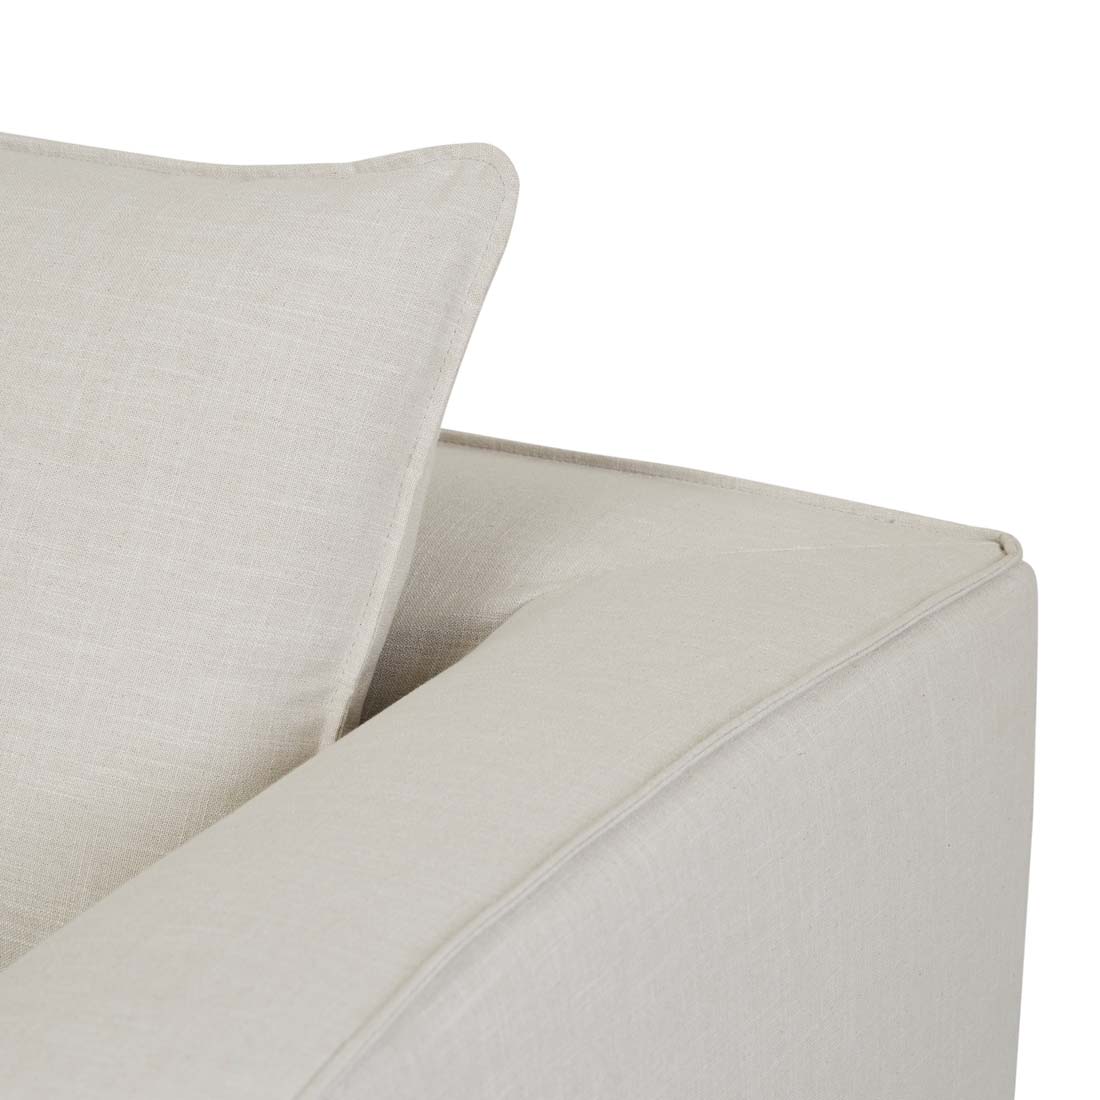 Airlie Slouch 1 Seater Right Arm Sofa image 7